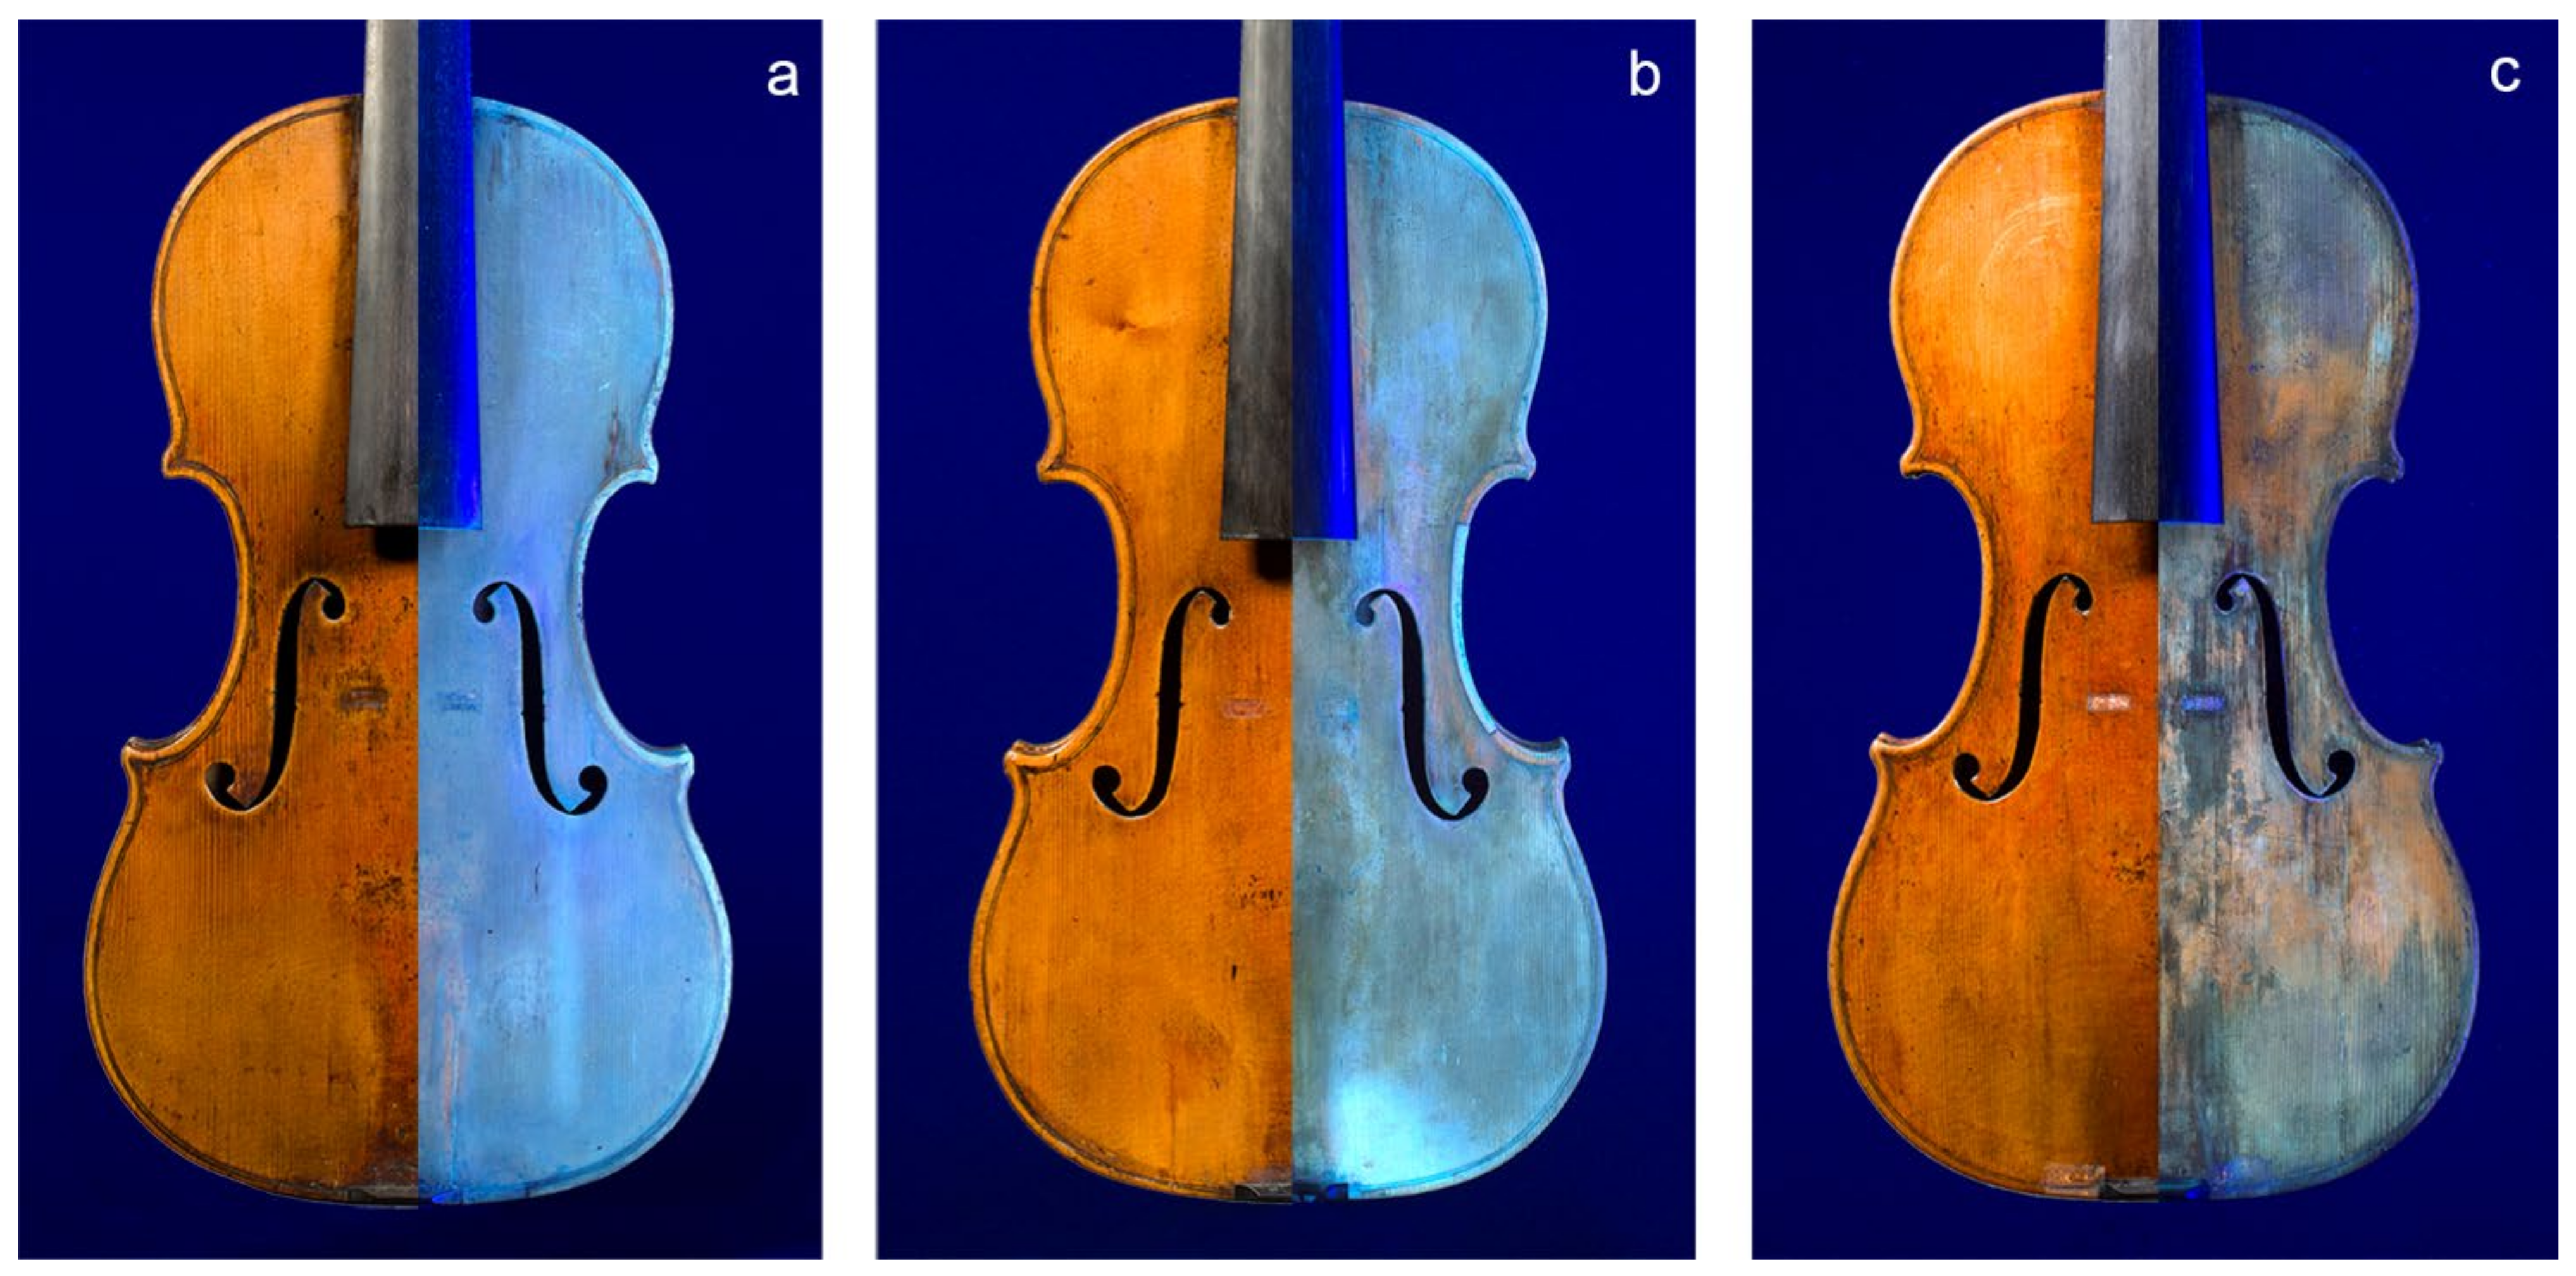 Coatings | Free Full-Text | Compositional and Morphological Comparison  among Three Coeval Violins Made by Giuseppe Guarneri “del Gesù” in 1734